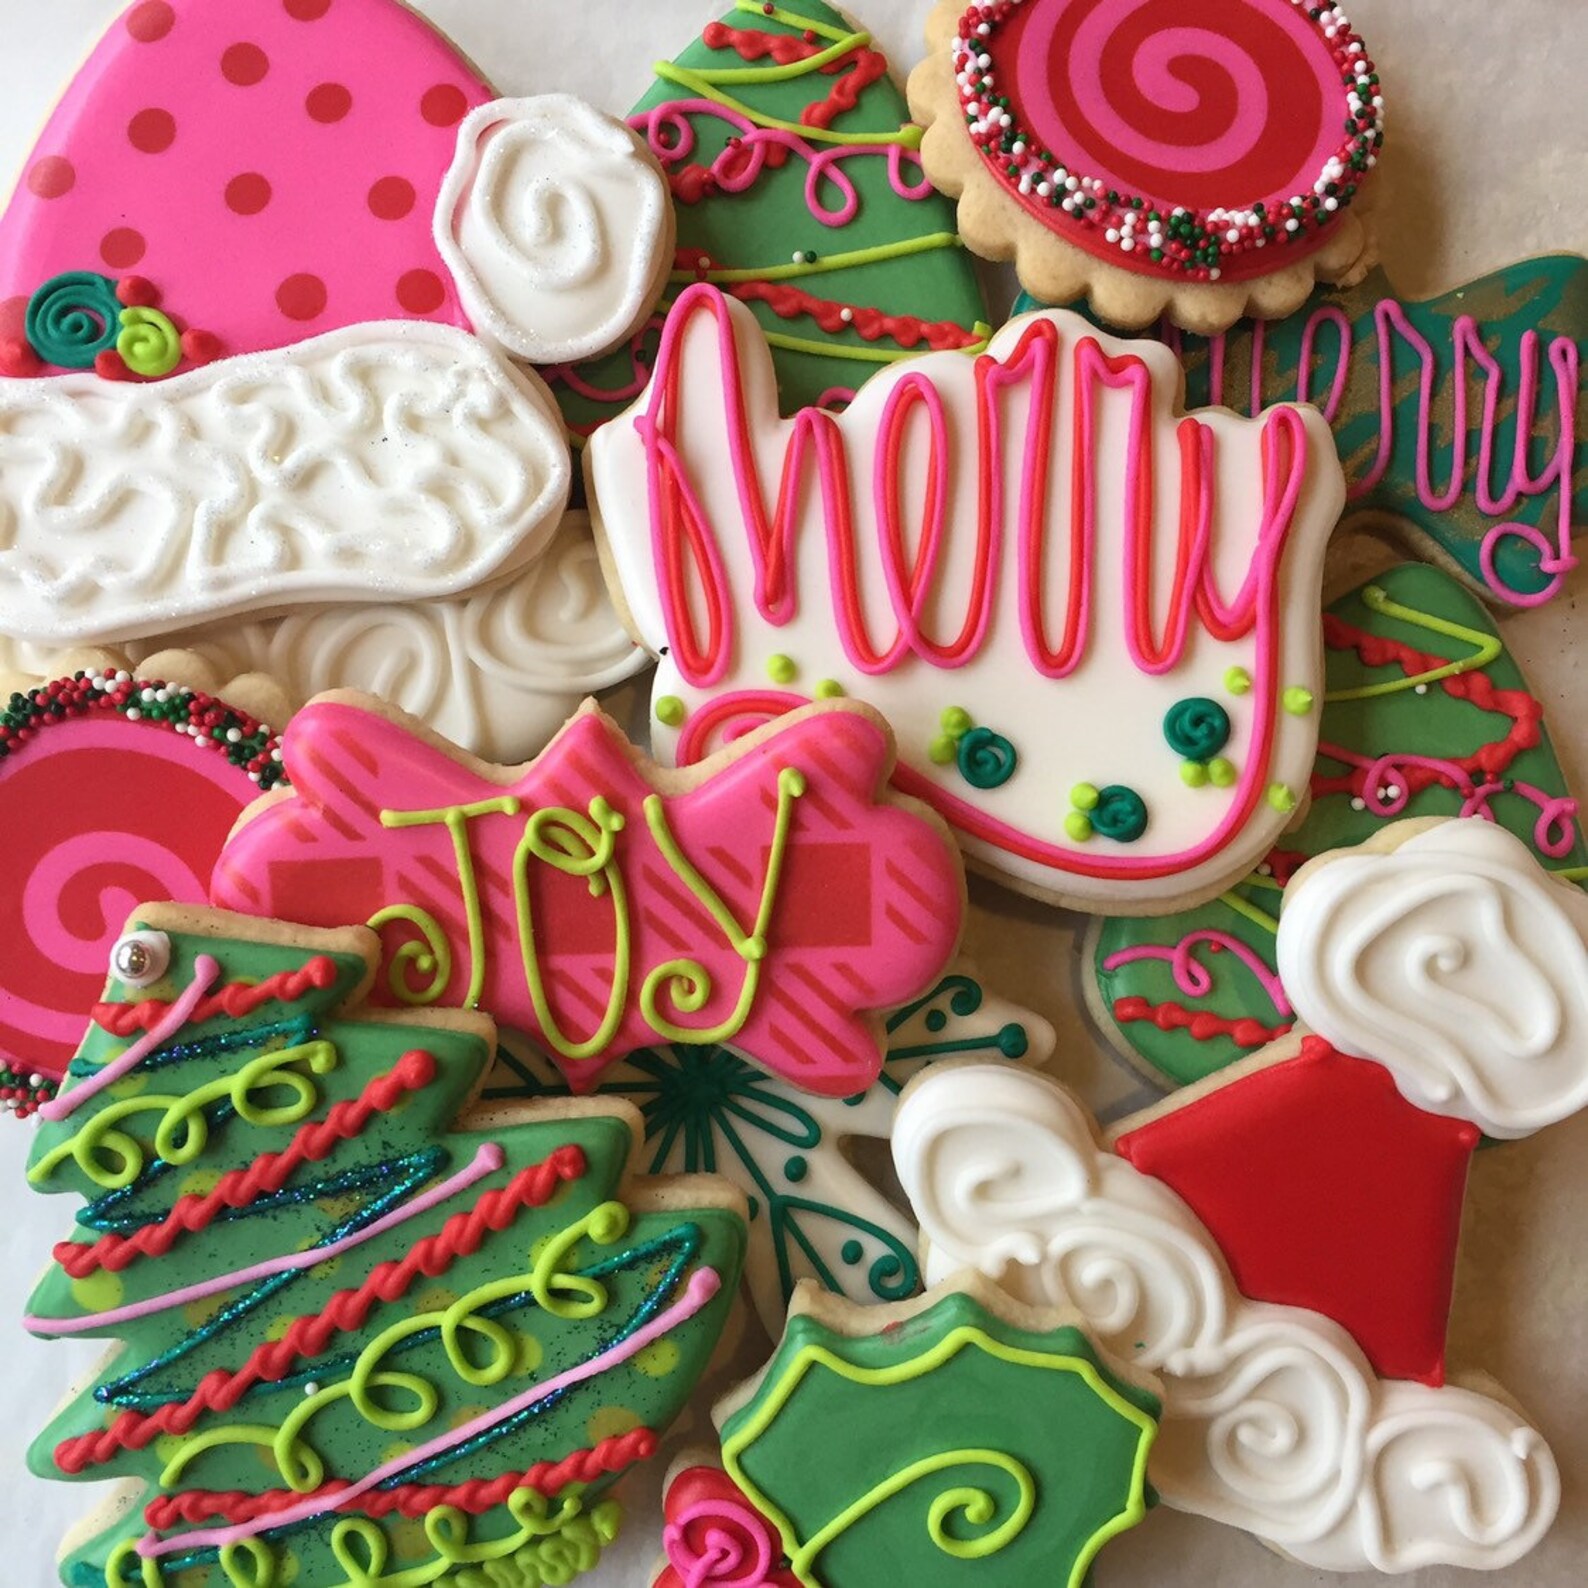 Ann Potter Baking Online Royal Icing Course - Etsy